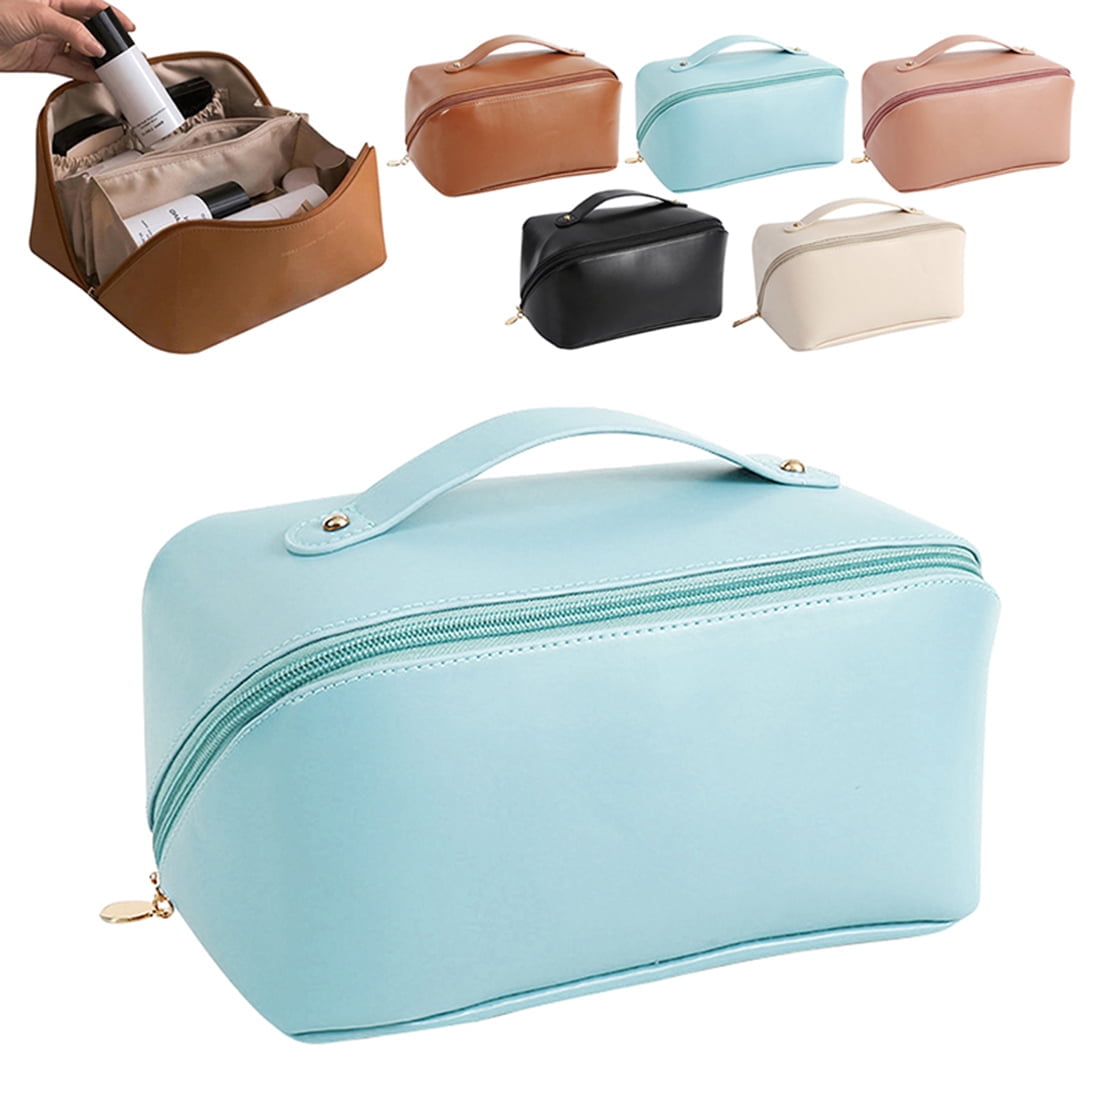  Makeup Bag - Large Capacity Travel Cosmetic Bag for Women,  Multifunctional Open Flat Toiletry Bag with Handle, Washable Waterproof  Beauty Zipper Makeup Organizer PU Leather, White : Beauty & Personal Care